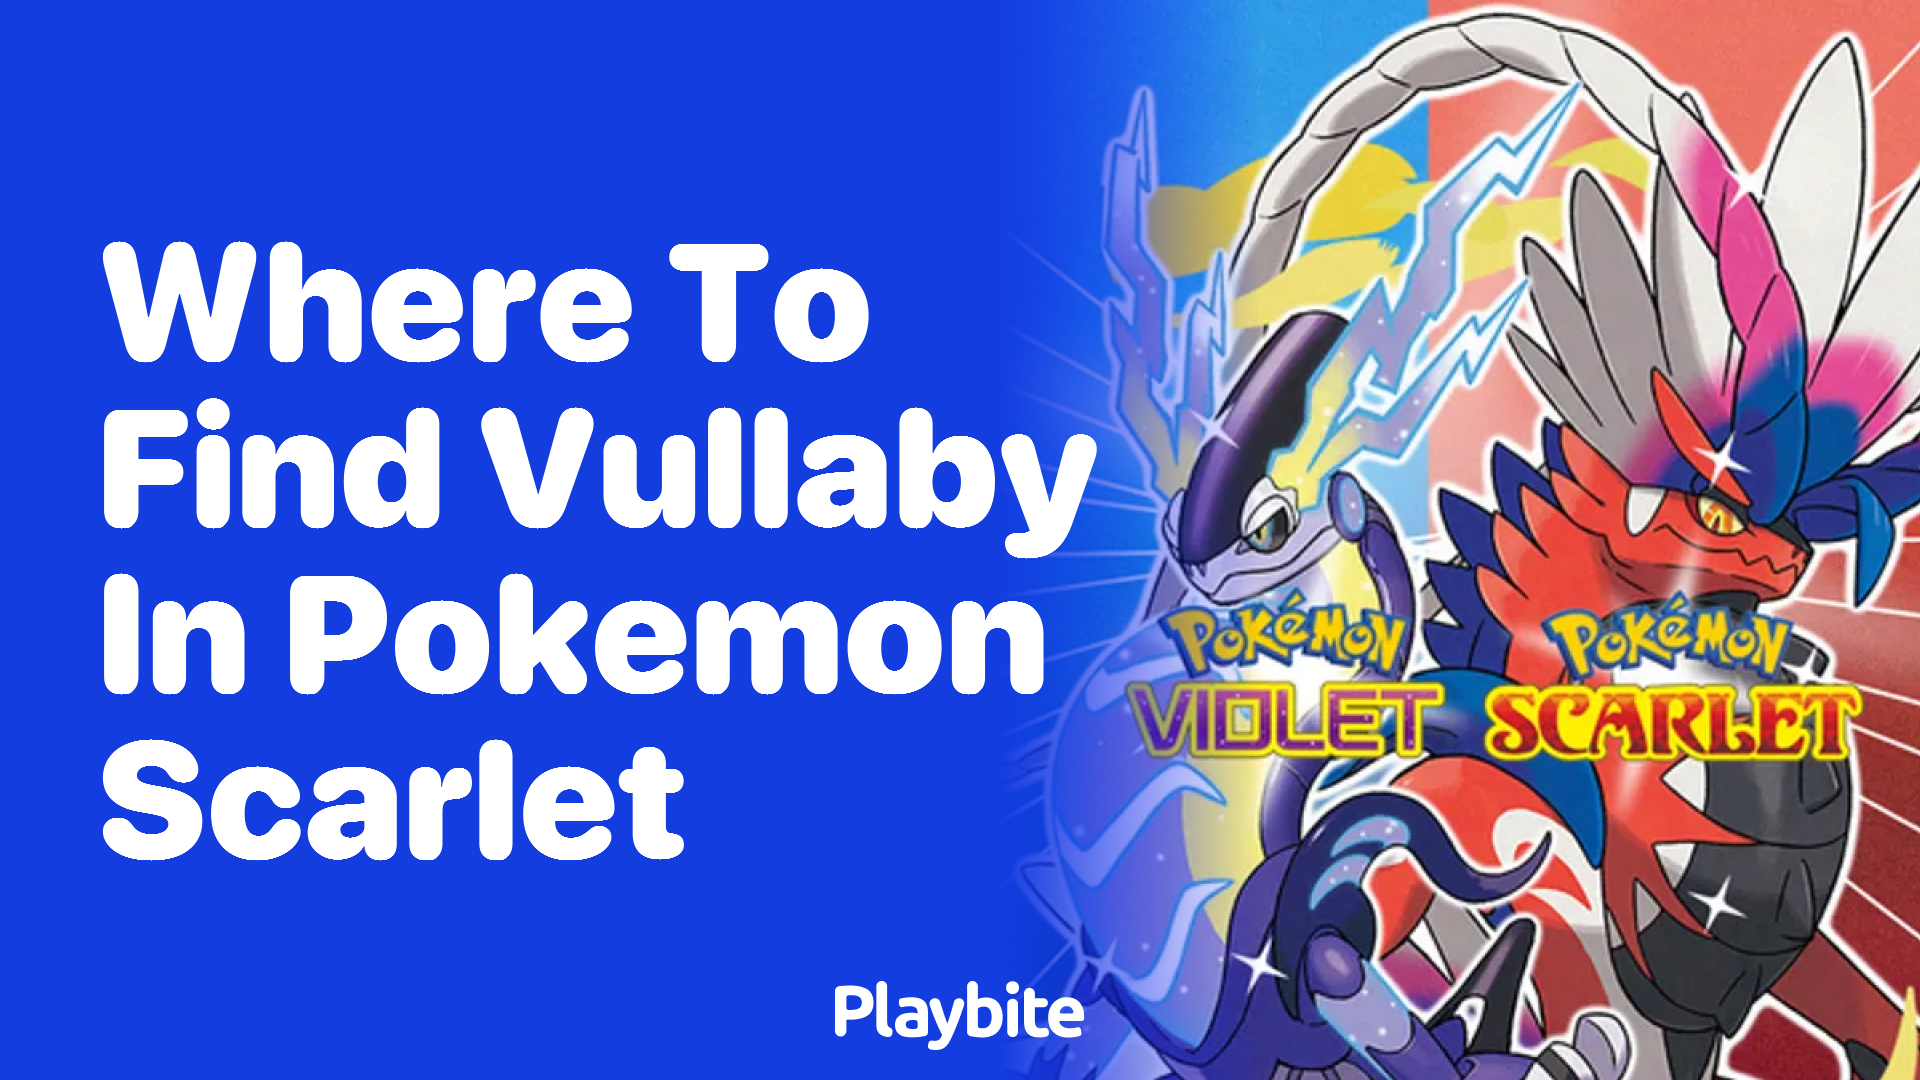 Where to Find Vullaby in Pokemon Scarlet